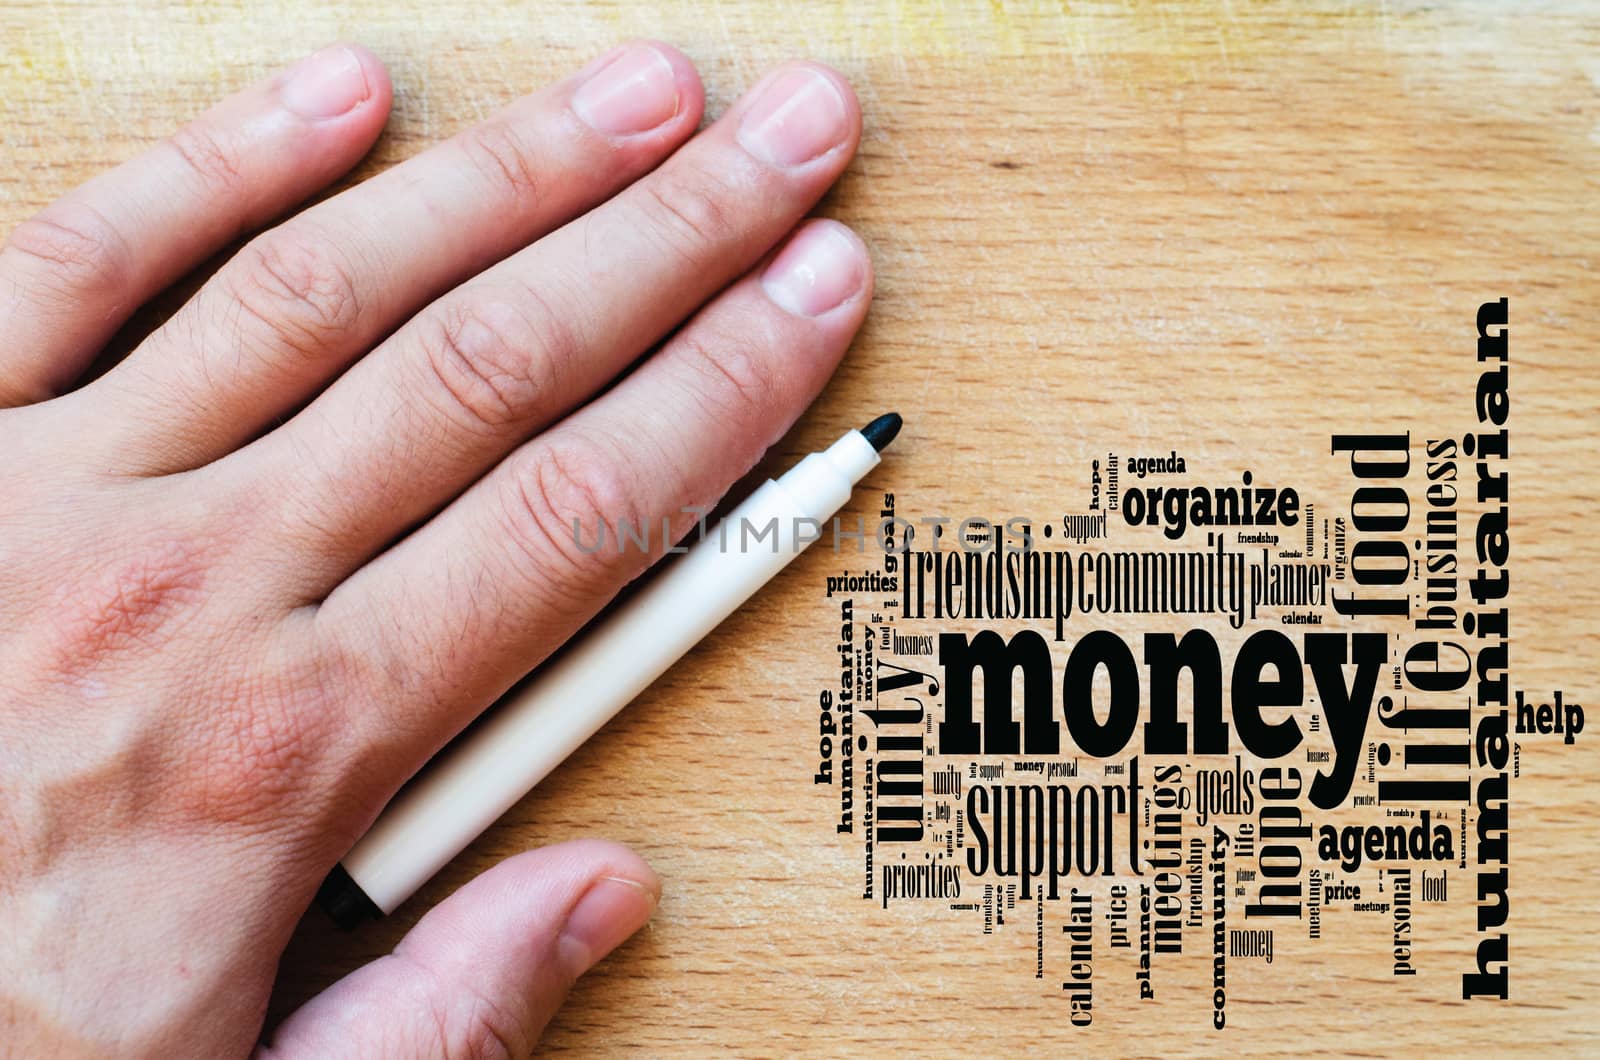 Money word cloud business concept over wooden background